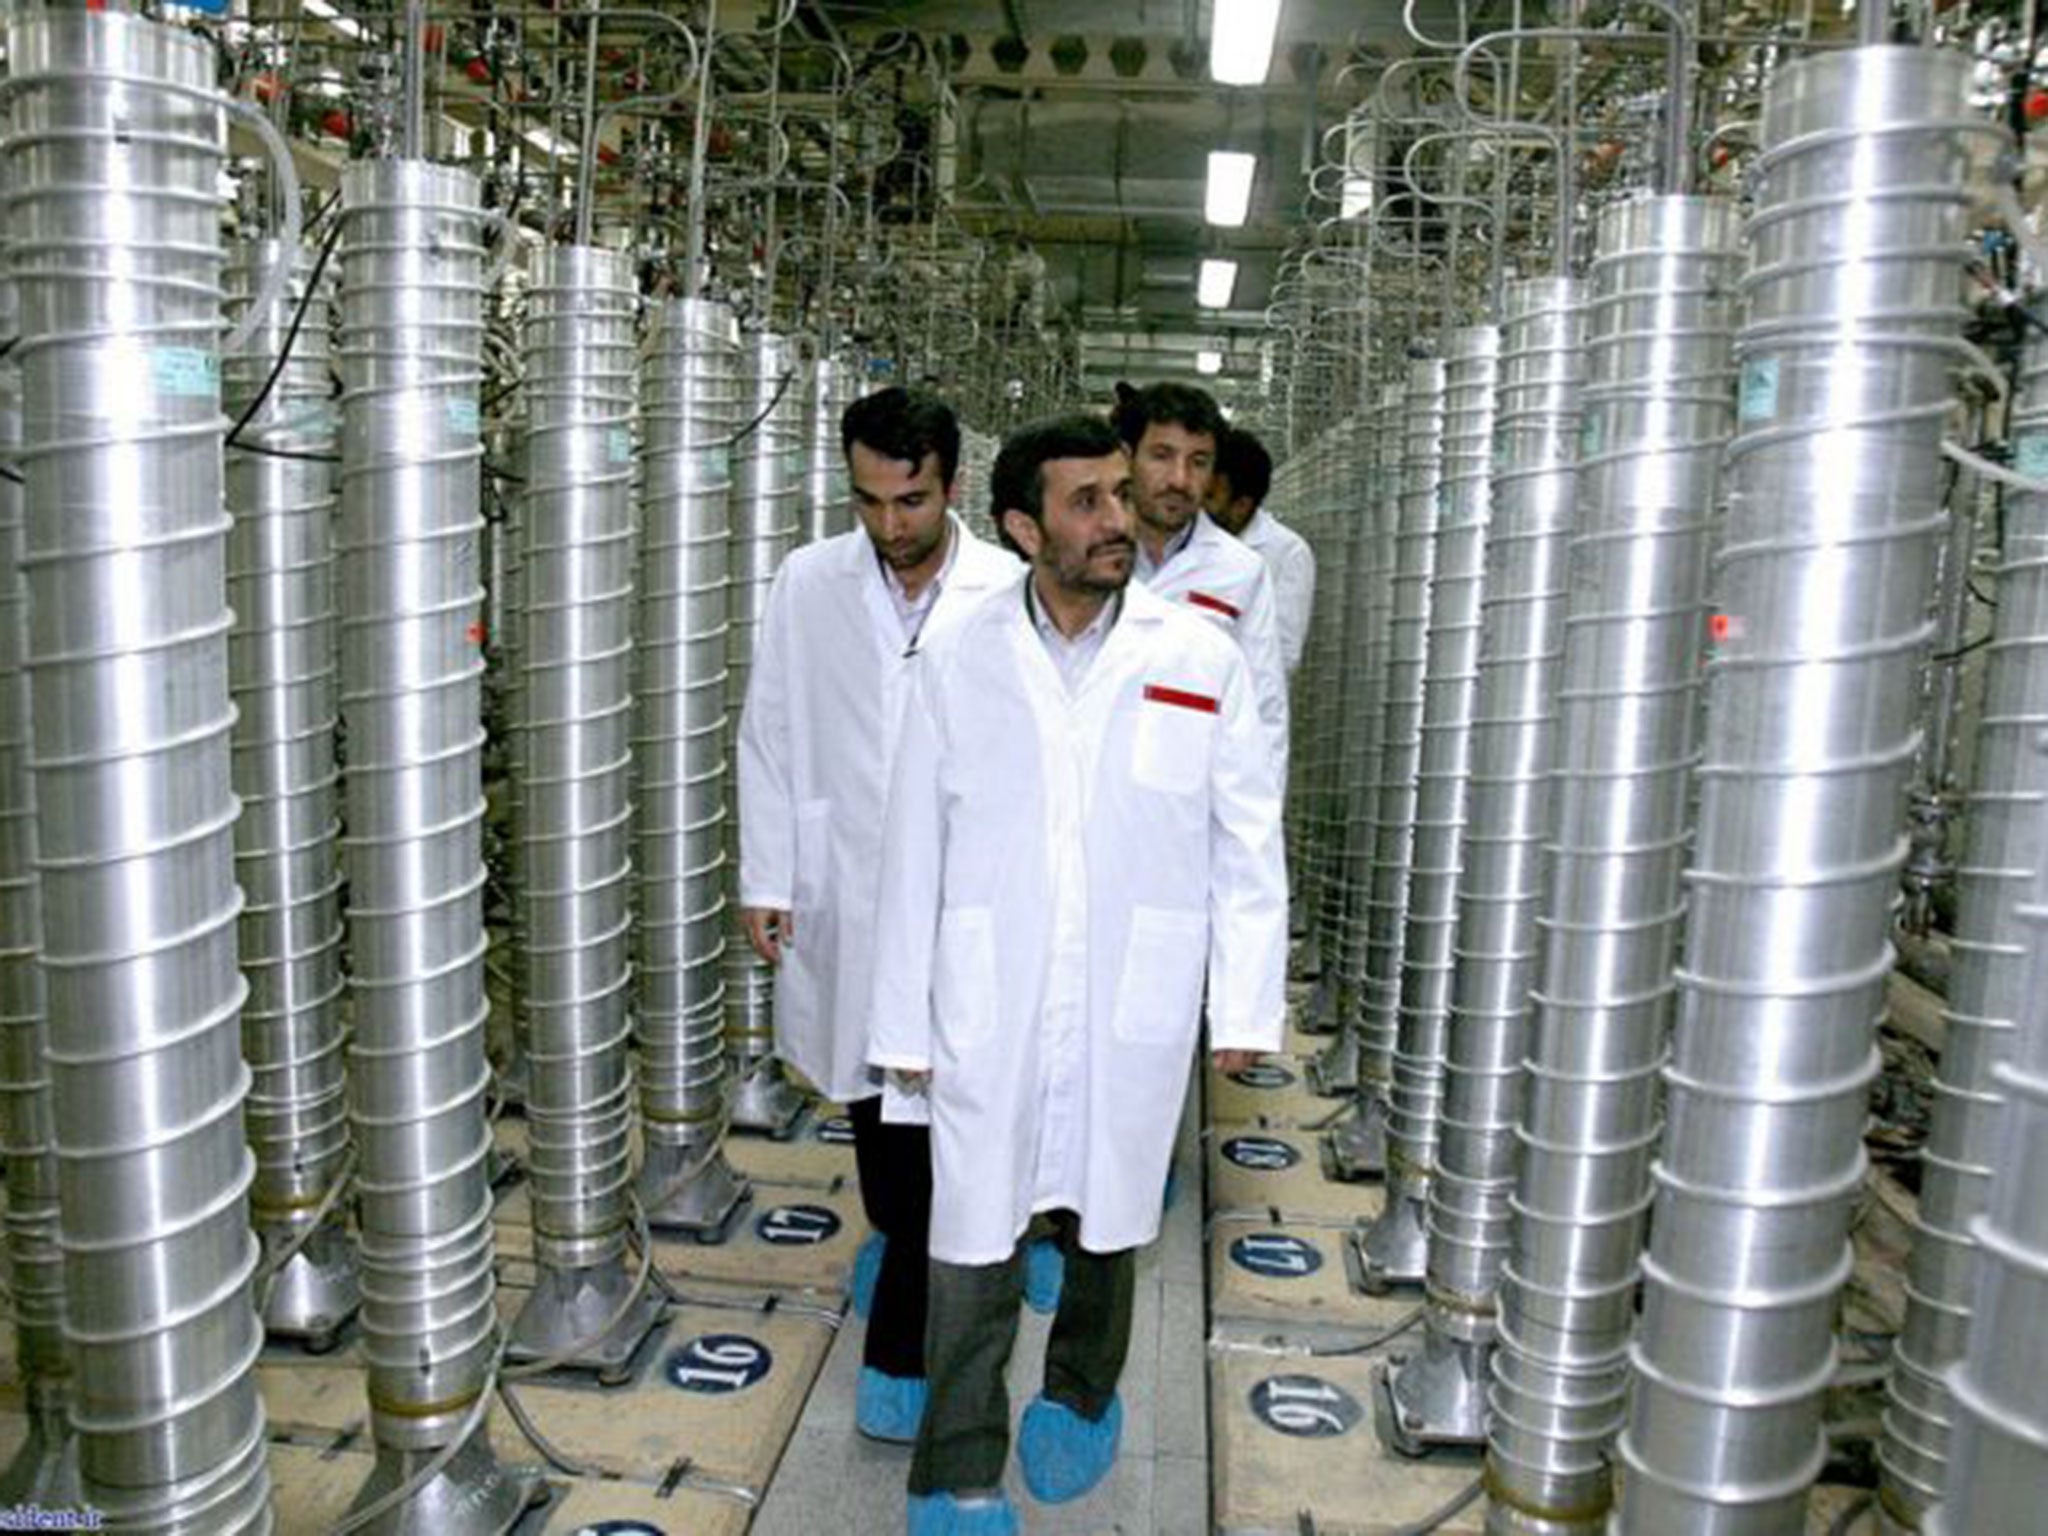 At the Natanz uranium enrichment plant Iranian scientists are producing nuclear fuel using thousands of centrifuges in underground laboratories